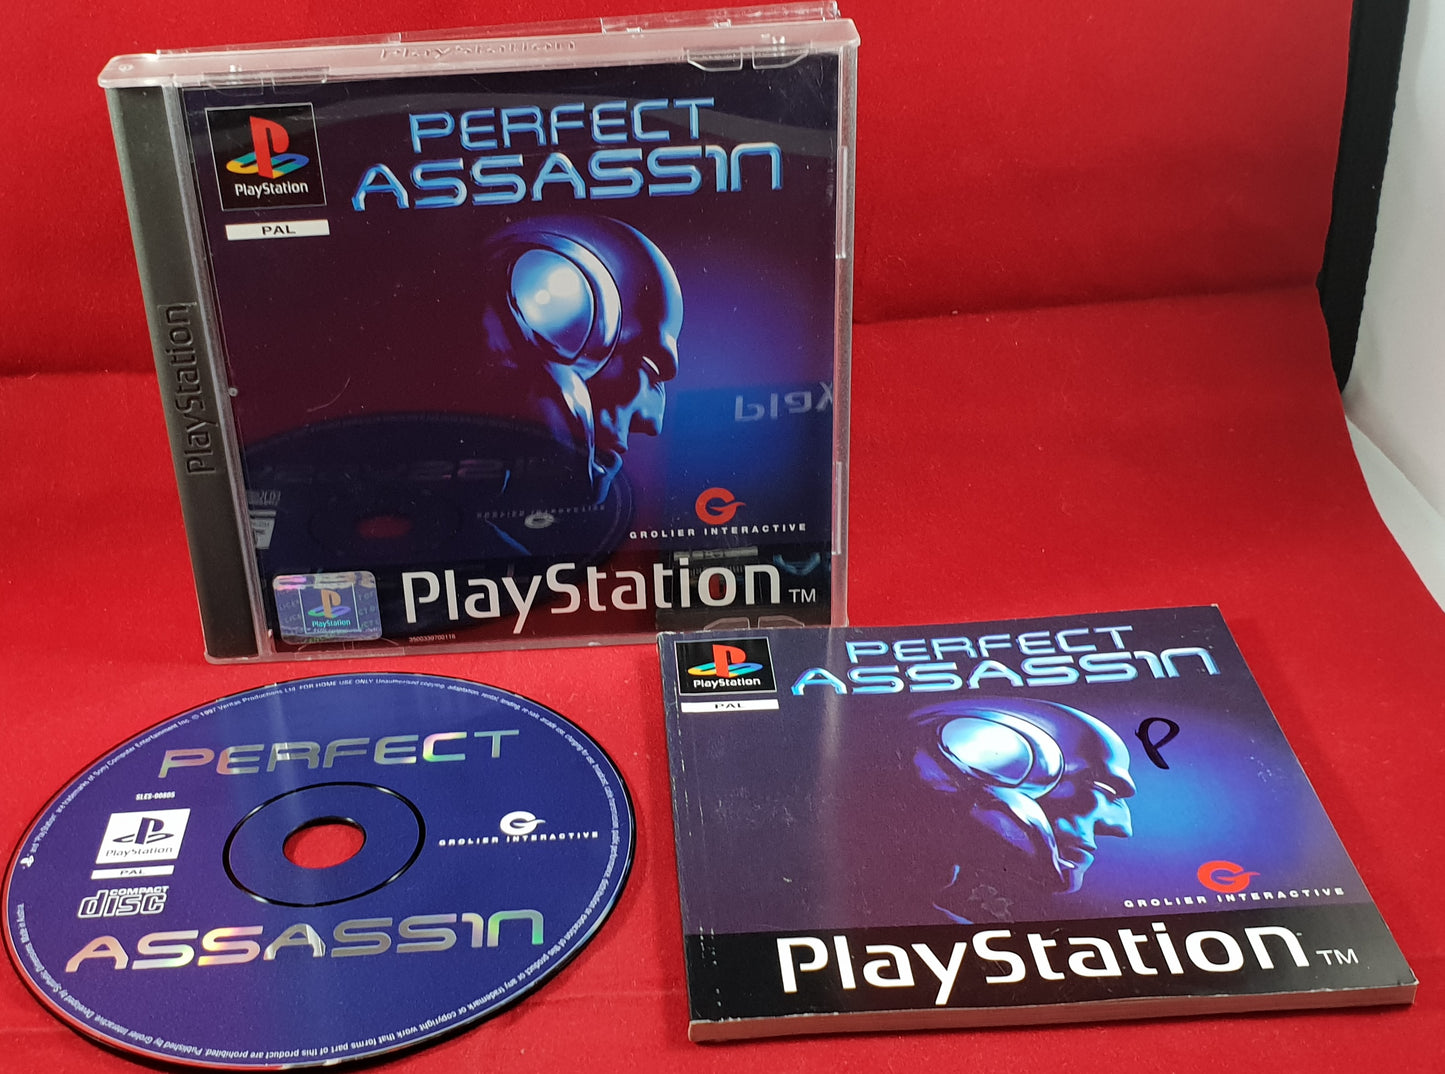 Perfect Assassin Sony Playstation 1 (PS1) Game